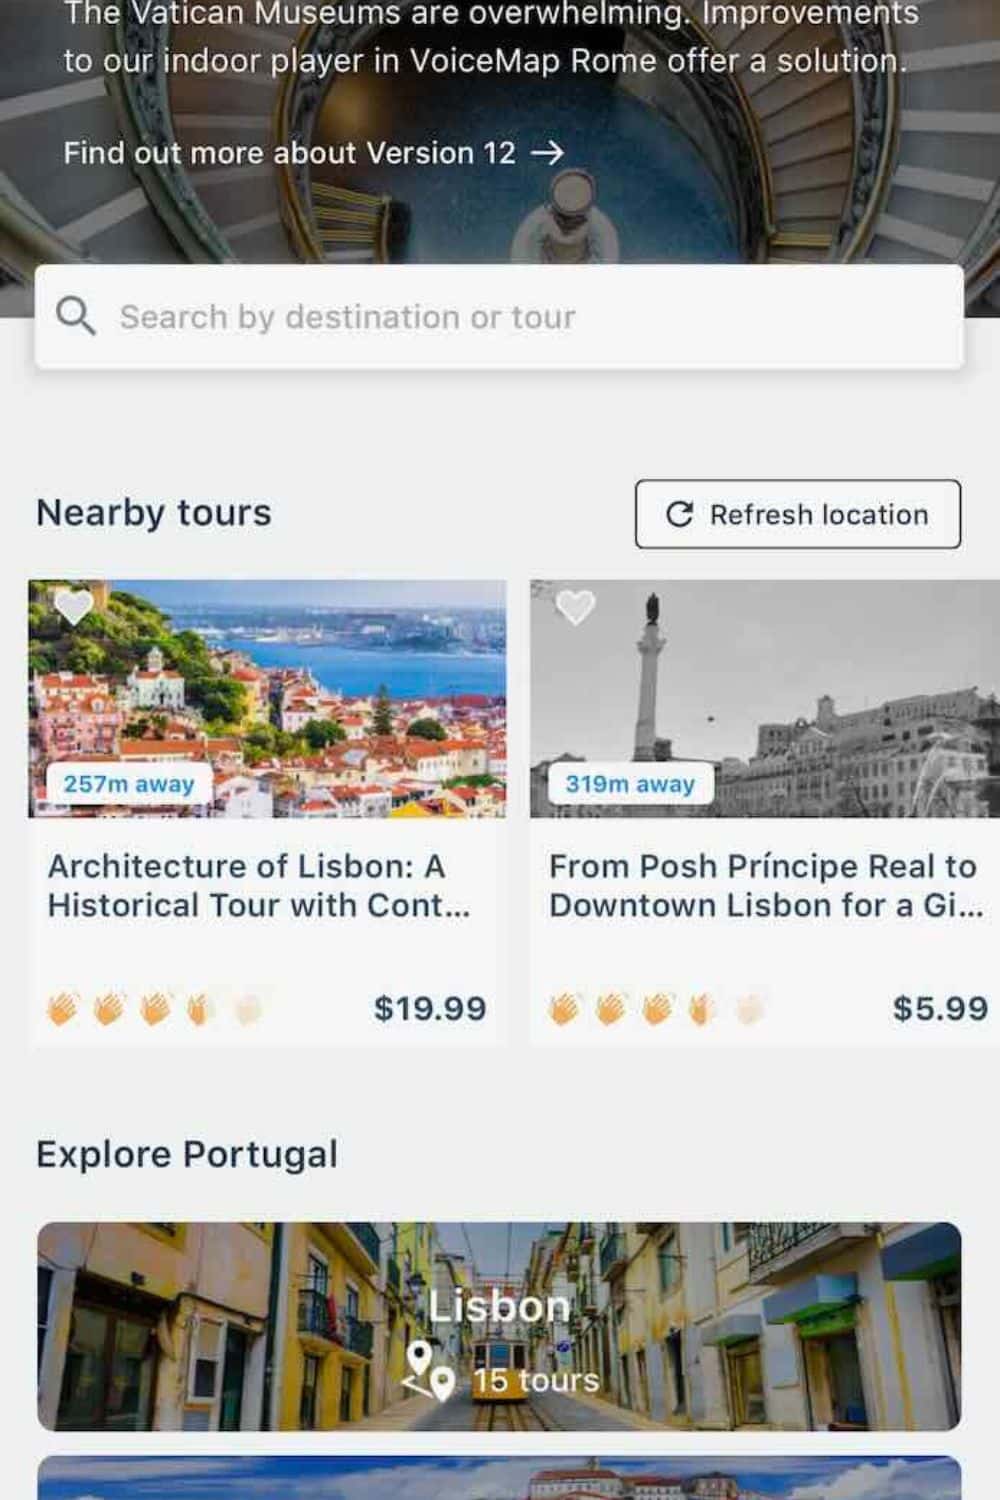 Screenshot of a travel app featuring tours in Lisbon and highlighting the Vatican Museums audio tour.